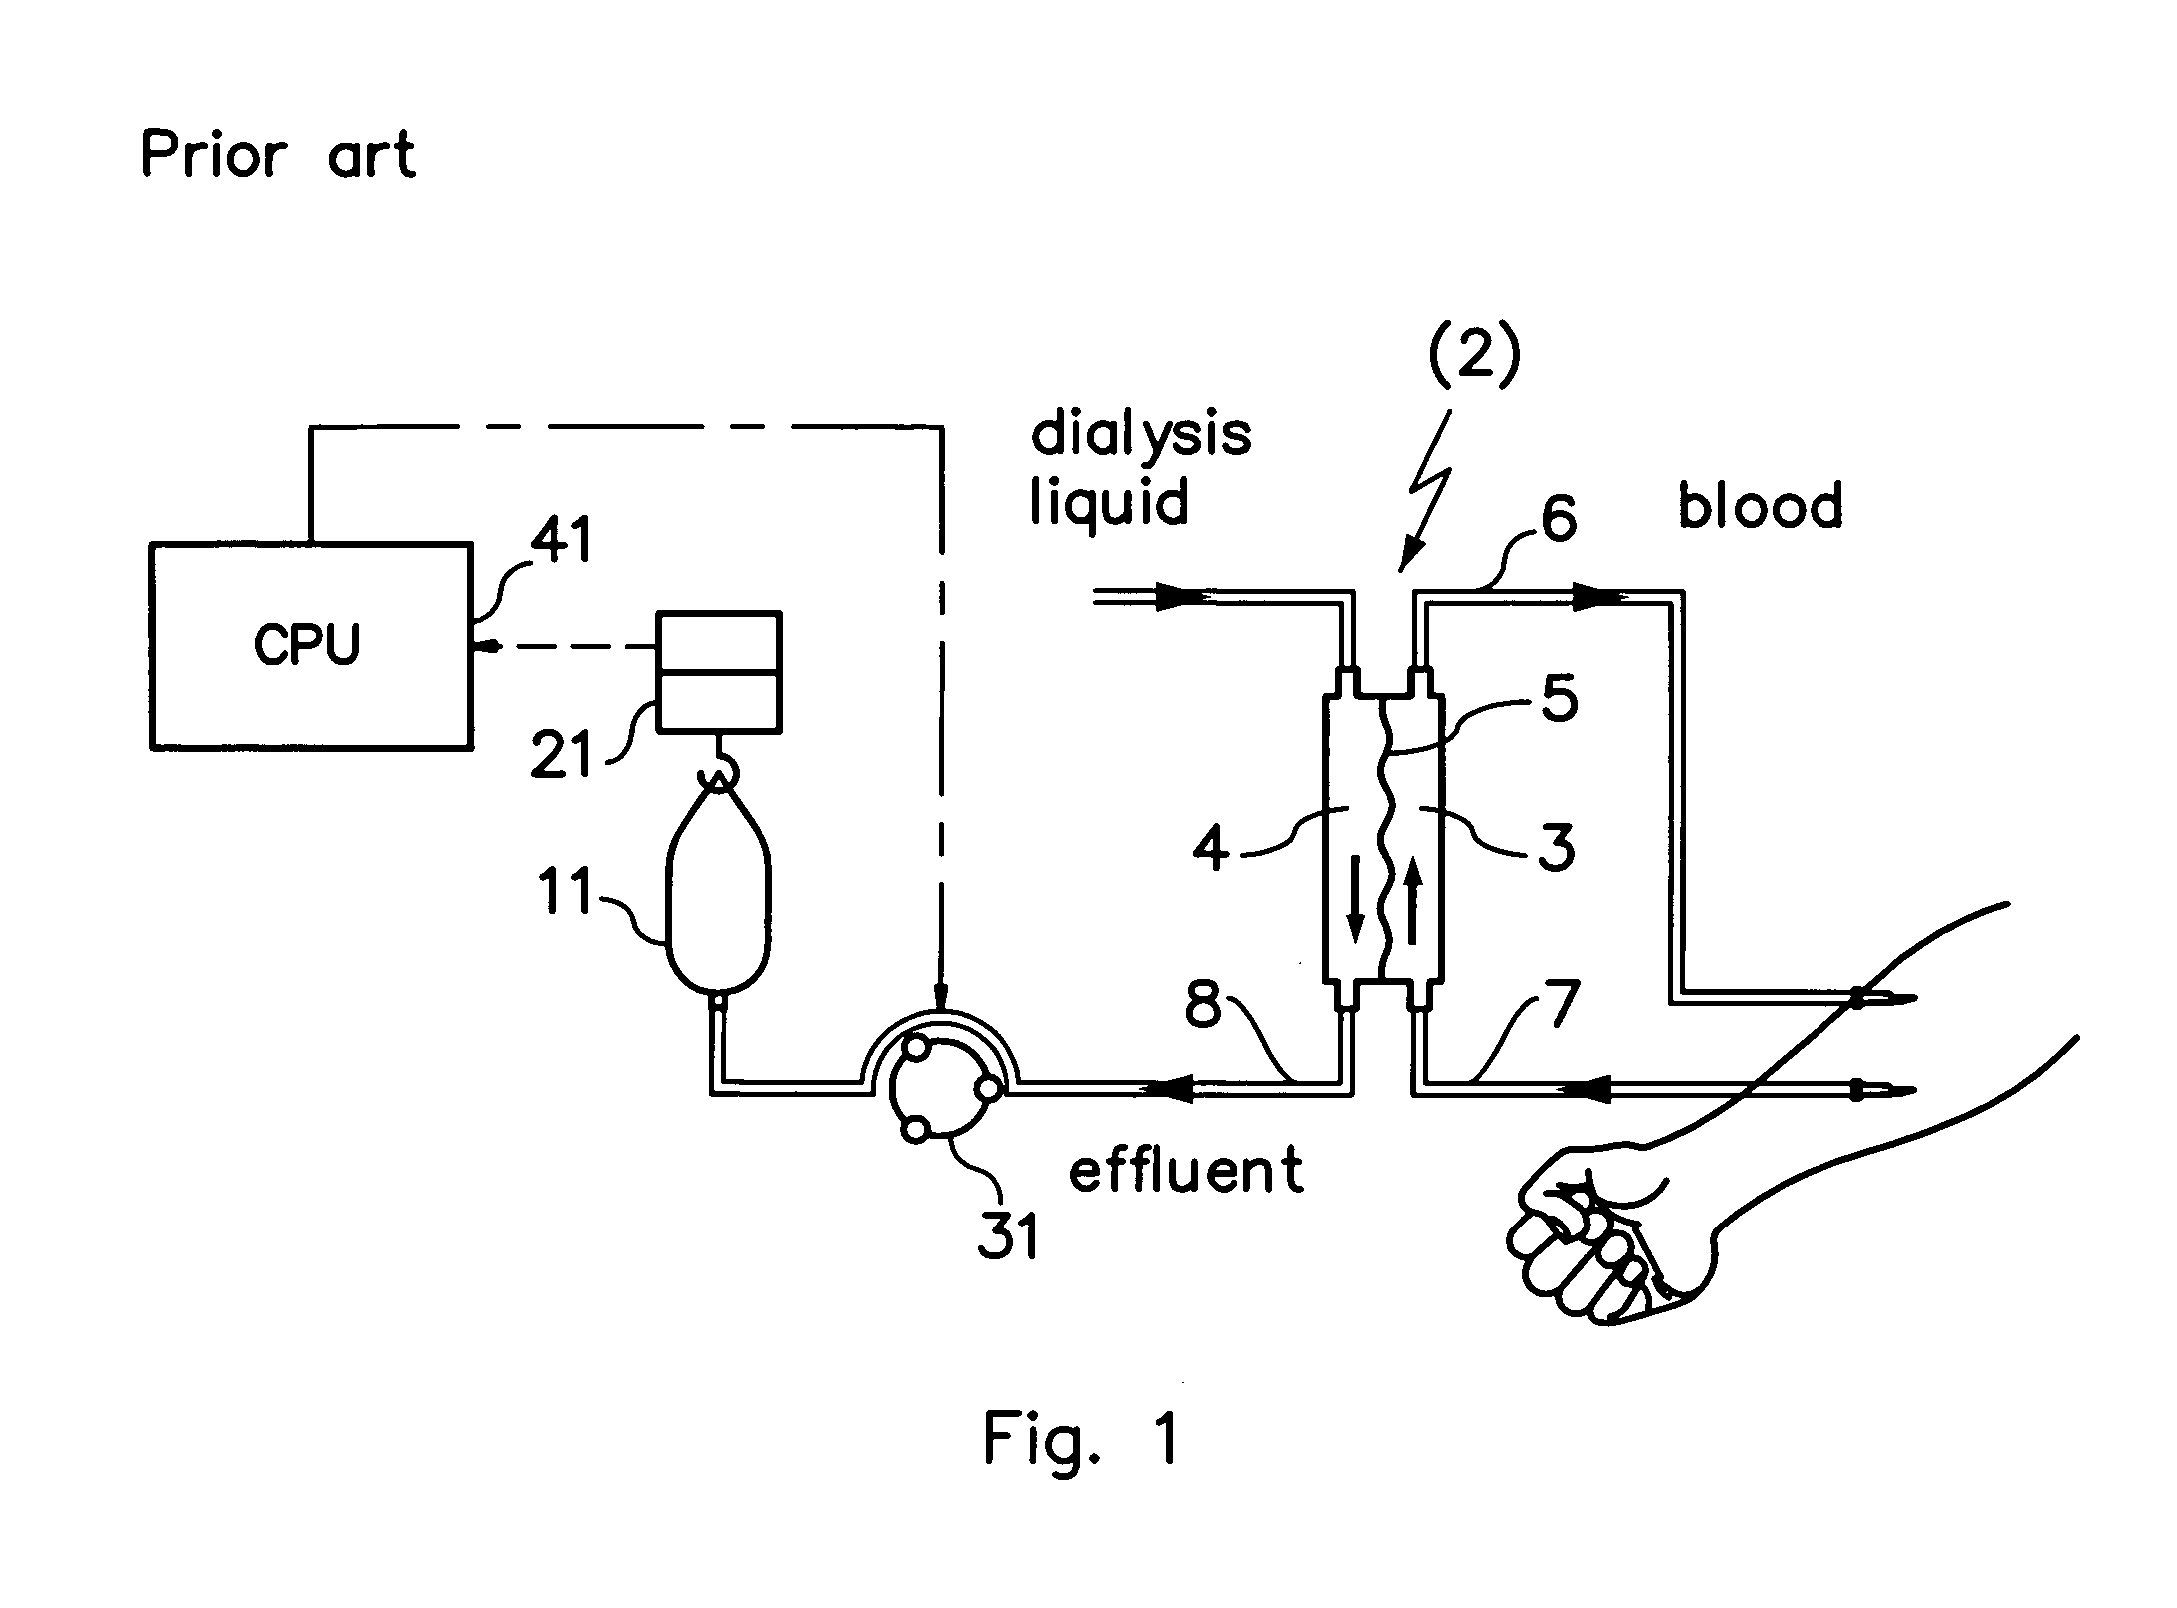 Extracorporeal treatment device with automatic emptying of waste bag